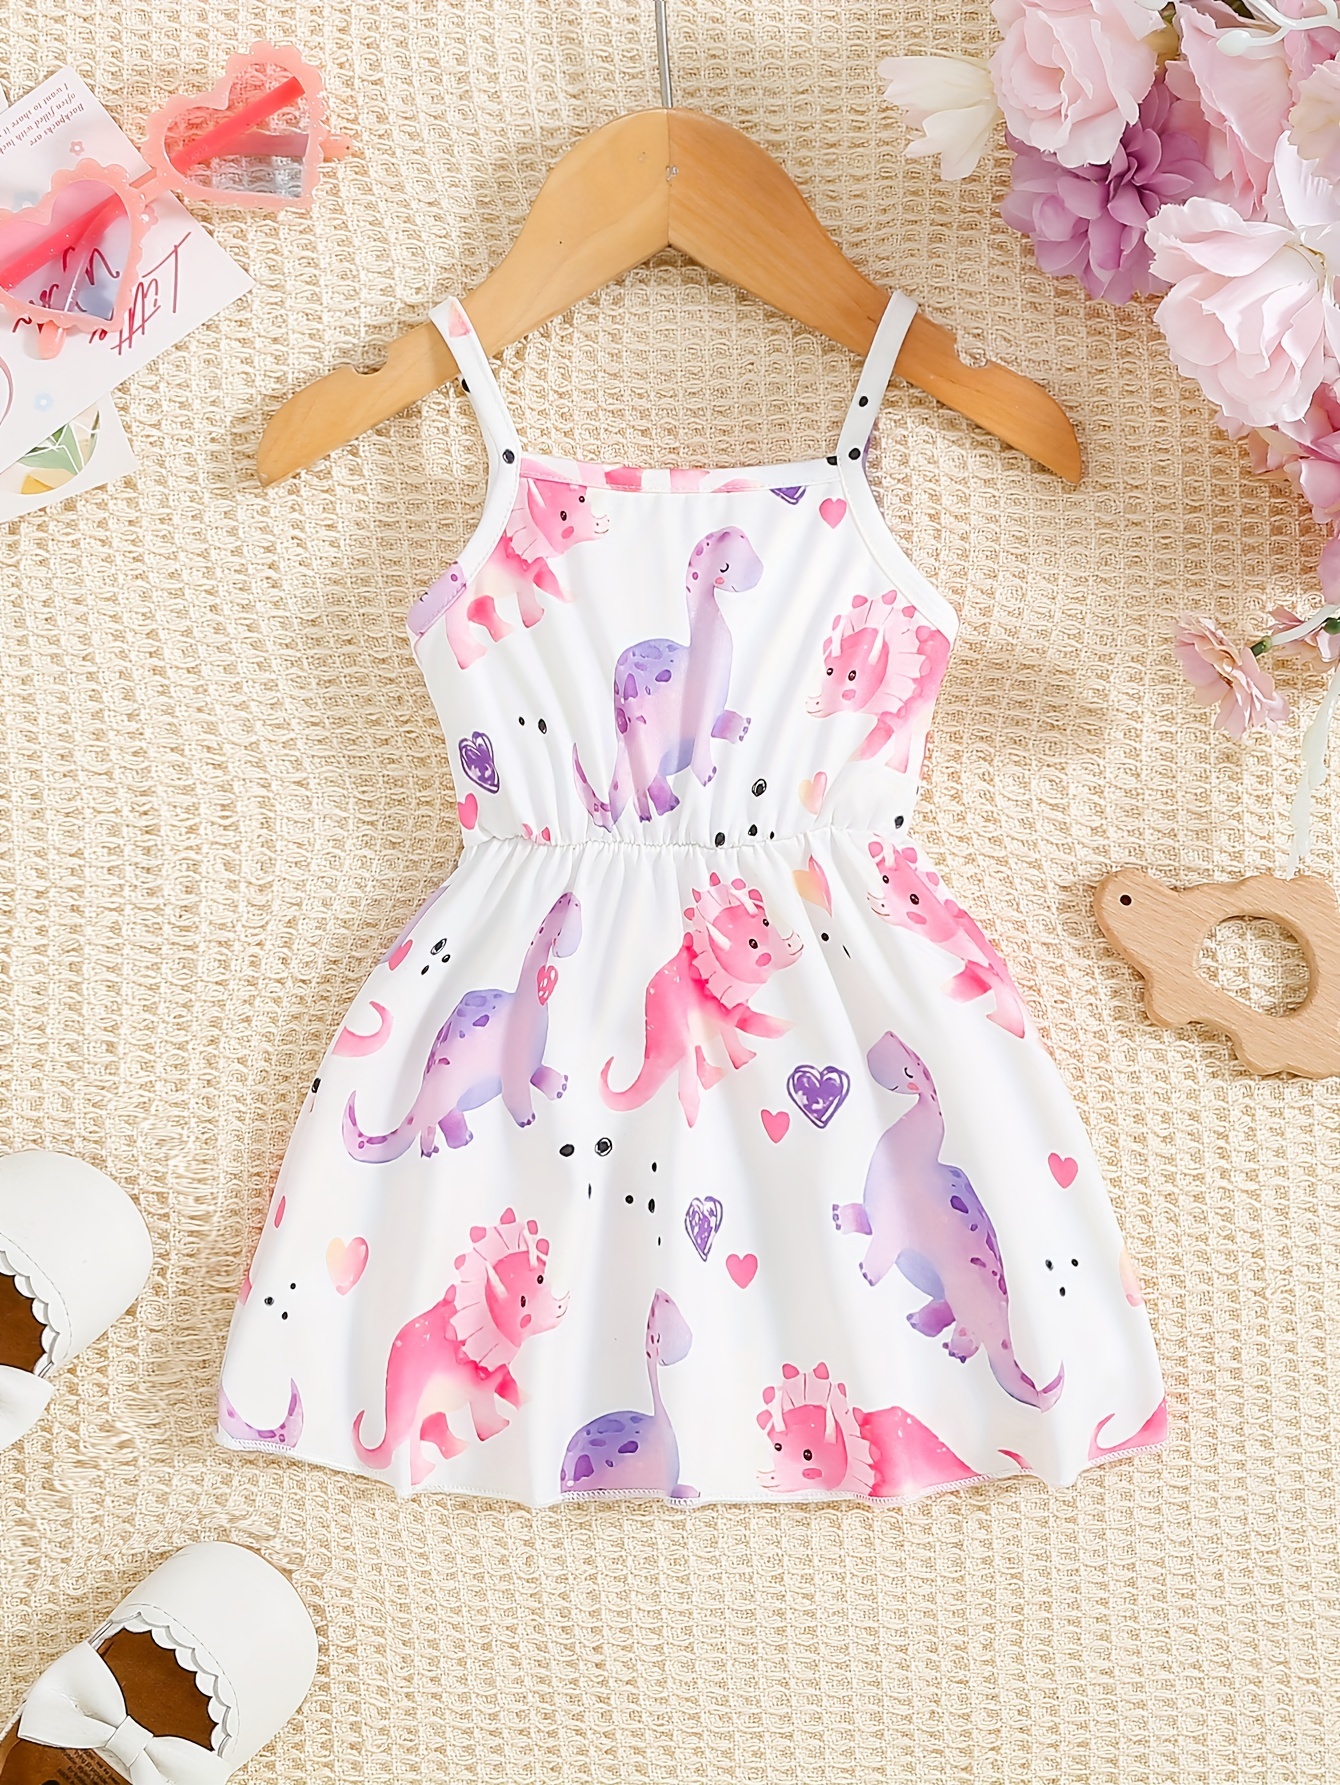 Baby's Color Clash Cartoon Dinosaur Pattern Cami Dress, Casual Sleeveless Dress, Infant & Toddler Girl's Clothing For Summer, As Gift